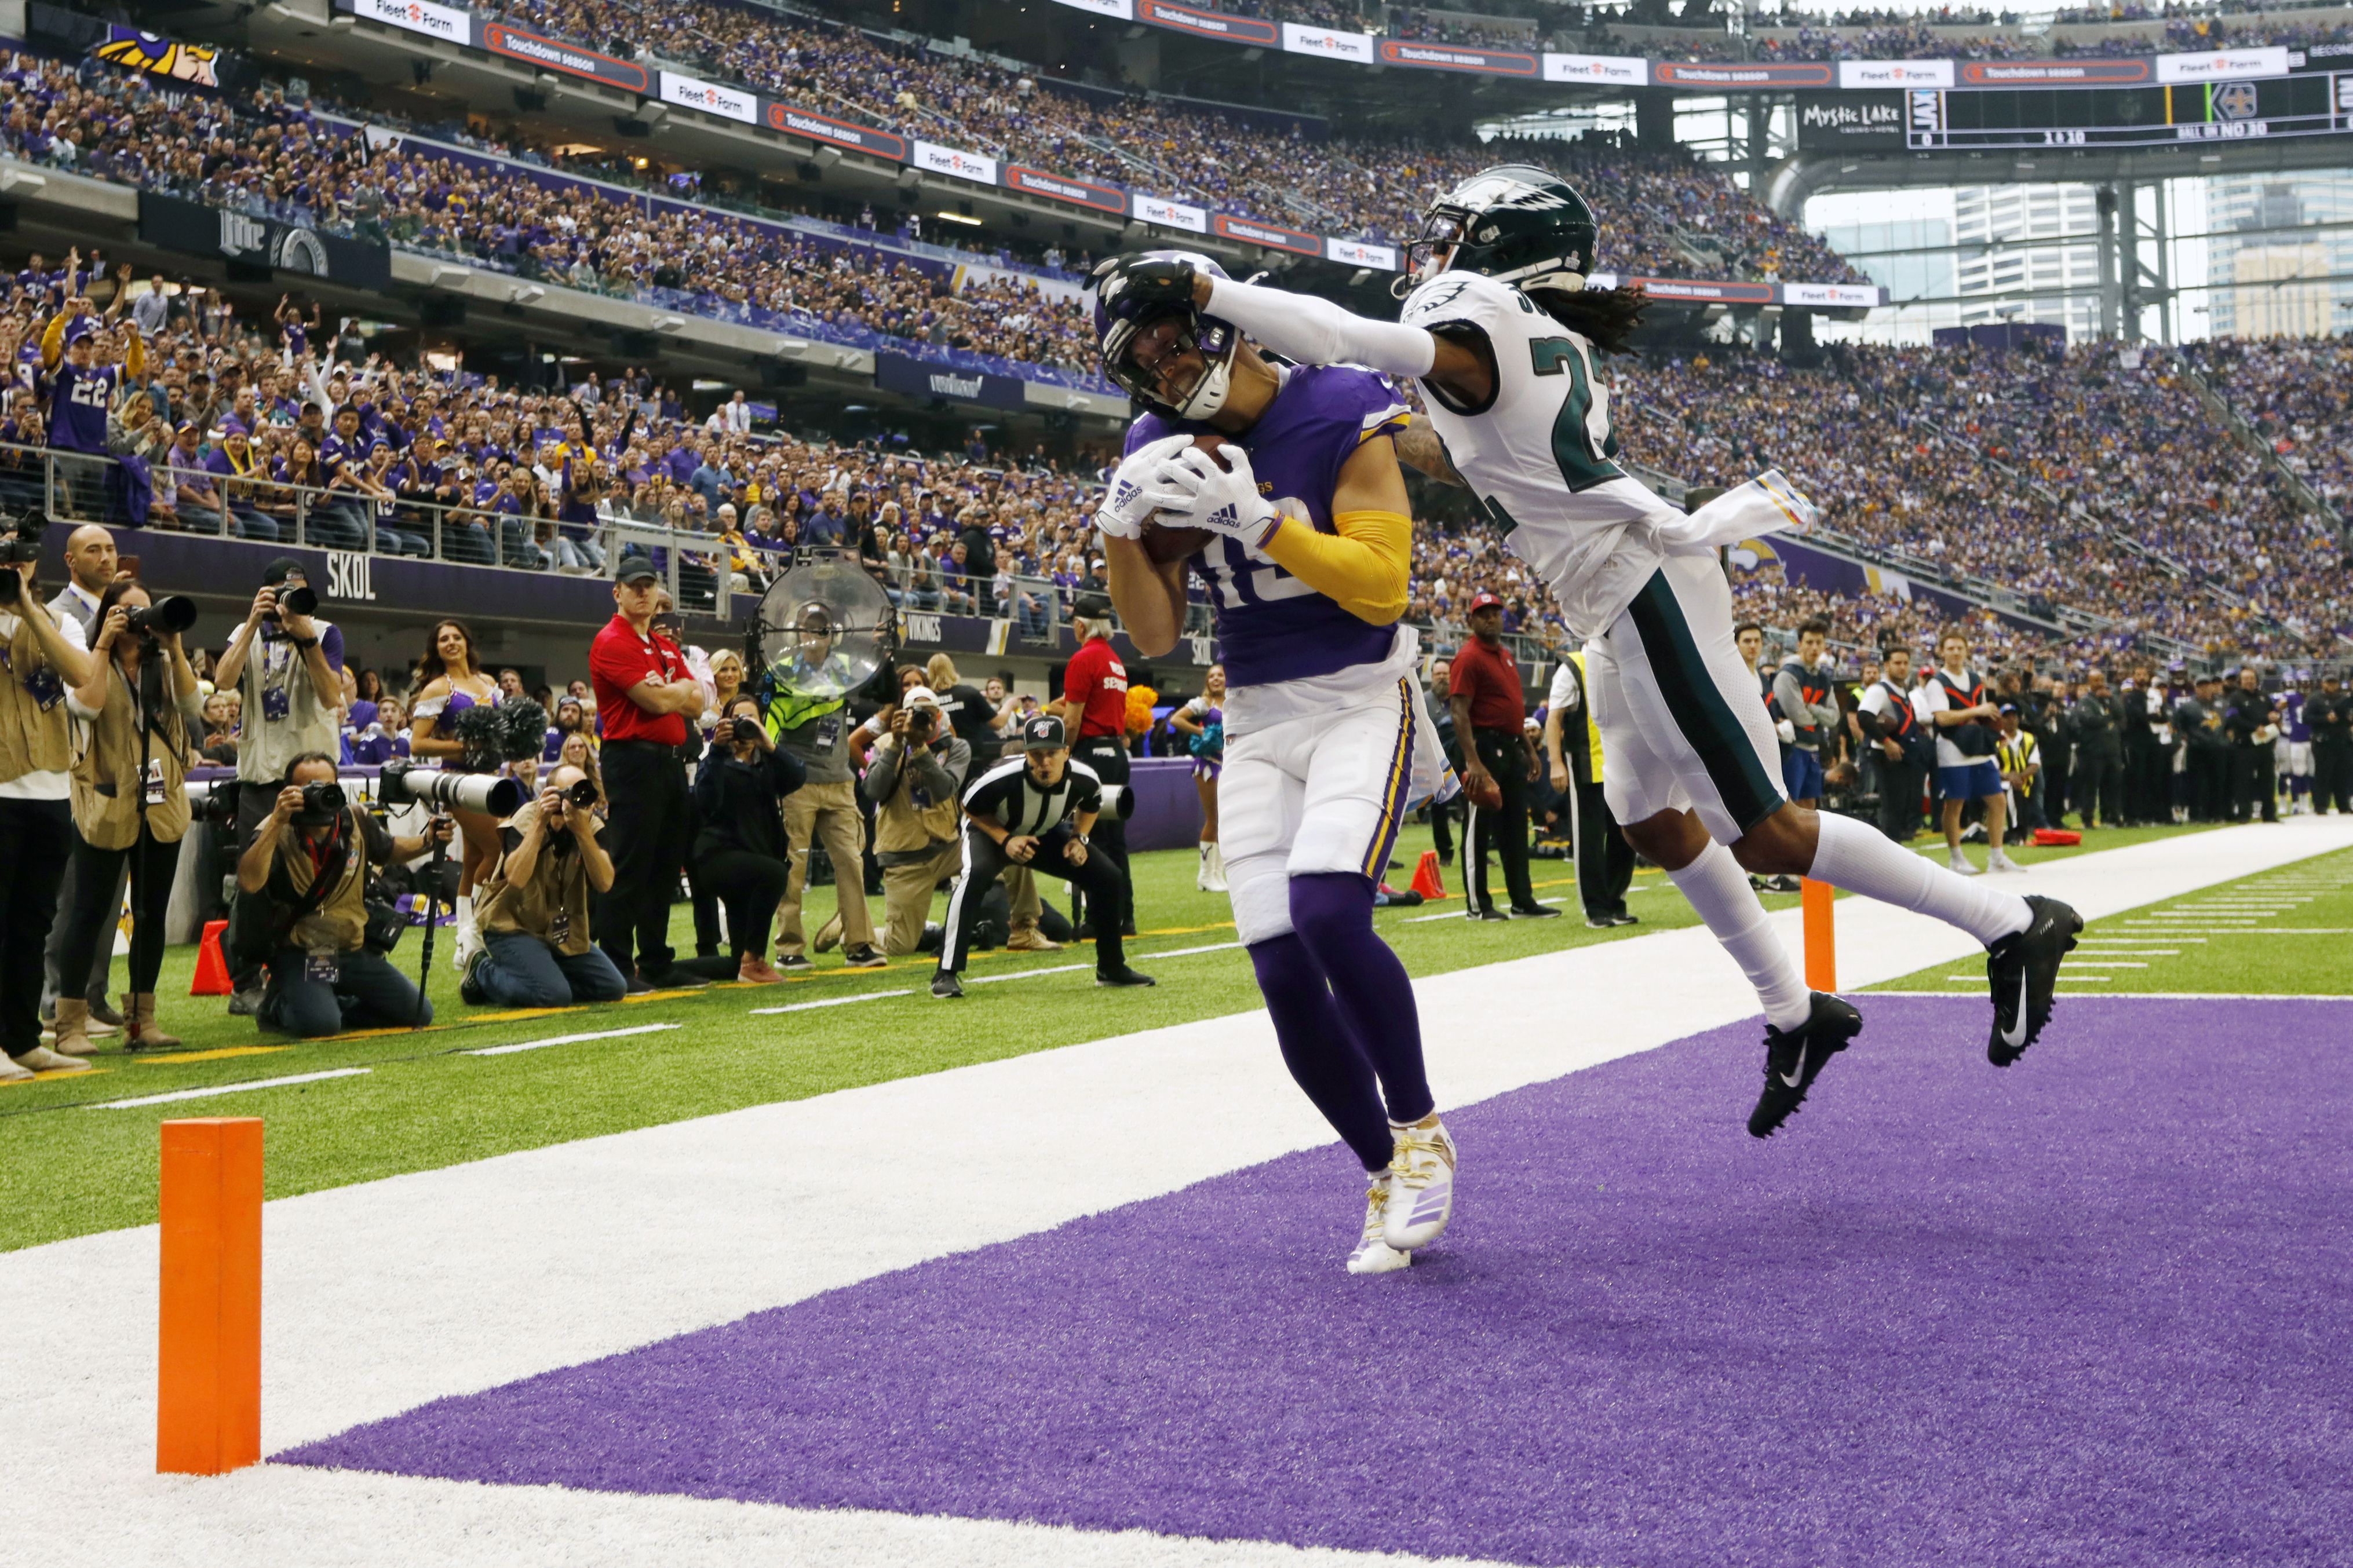 Minnesota Vikings wide receiver Adam Thielen catches a touchdown pass in front of Philadelphia Eagles cornerback Sidney Jones, right, during the first half of an NFL football game, Sunday, Oct. 13, 2019, in Minneapolis. (AP Photo/Bruce Kluckhohn)